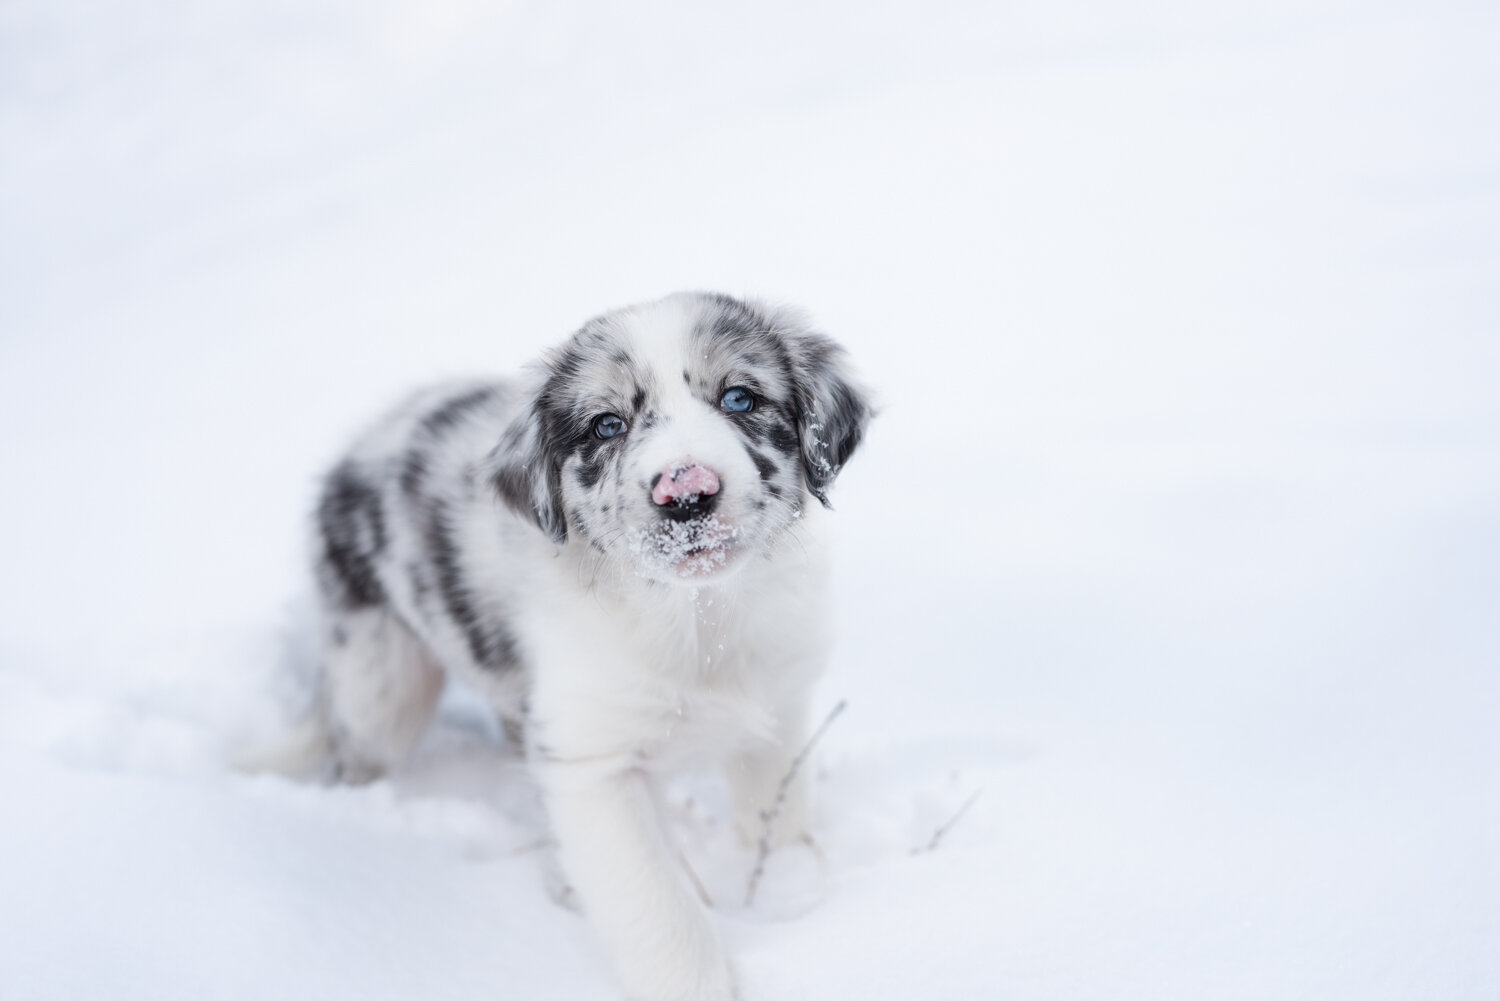  A sweet little australian shepherd puppy gets snow on his face as he takes his very first walk in snow, during an outdoor dog portrait session with Kathryn Learie. 